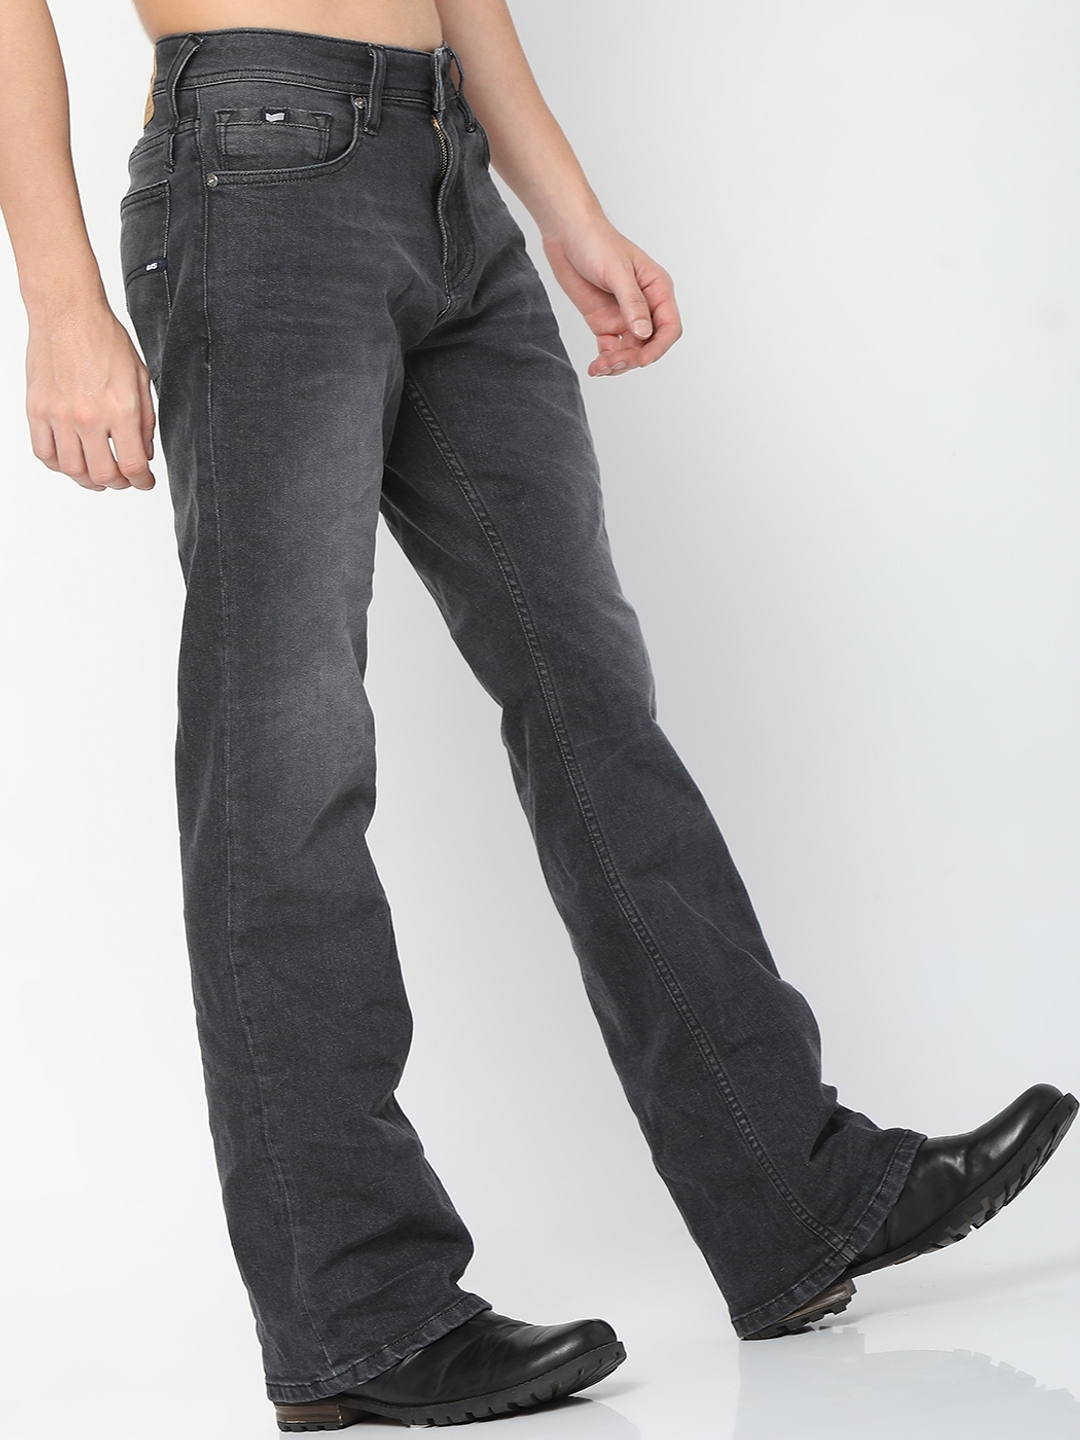 Gas Black Jeans - Buy Gas Black Jeans online in India